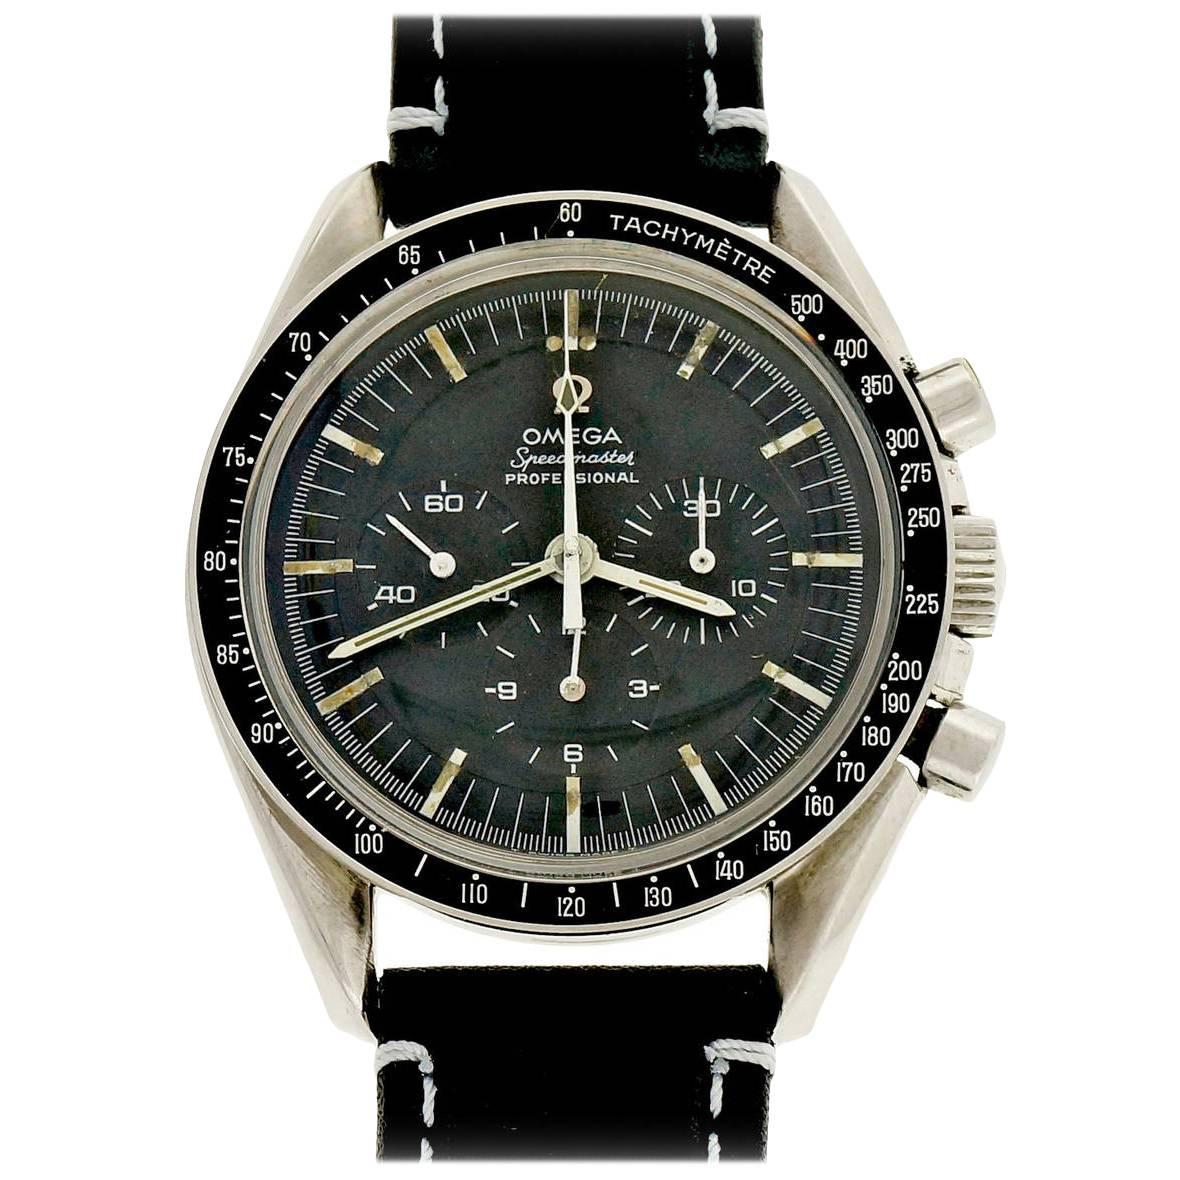 Omega Stainless Steel Speedmaster Chronograph Cal 861 Wristwatch